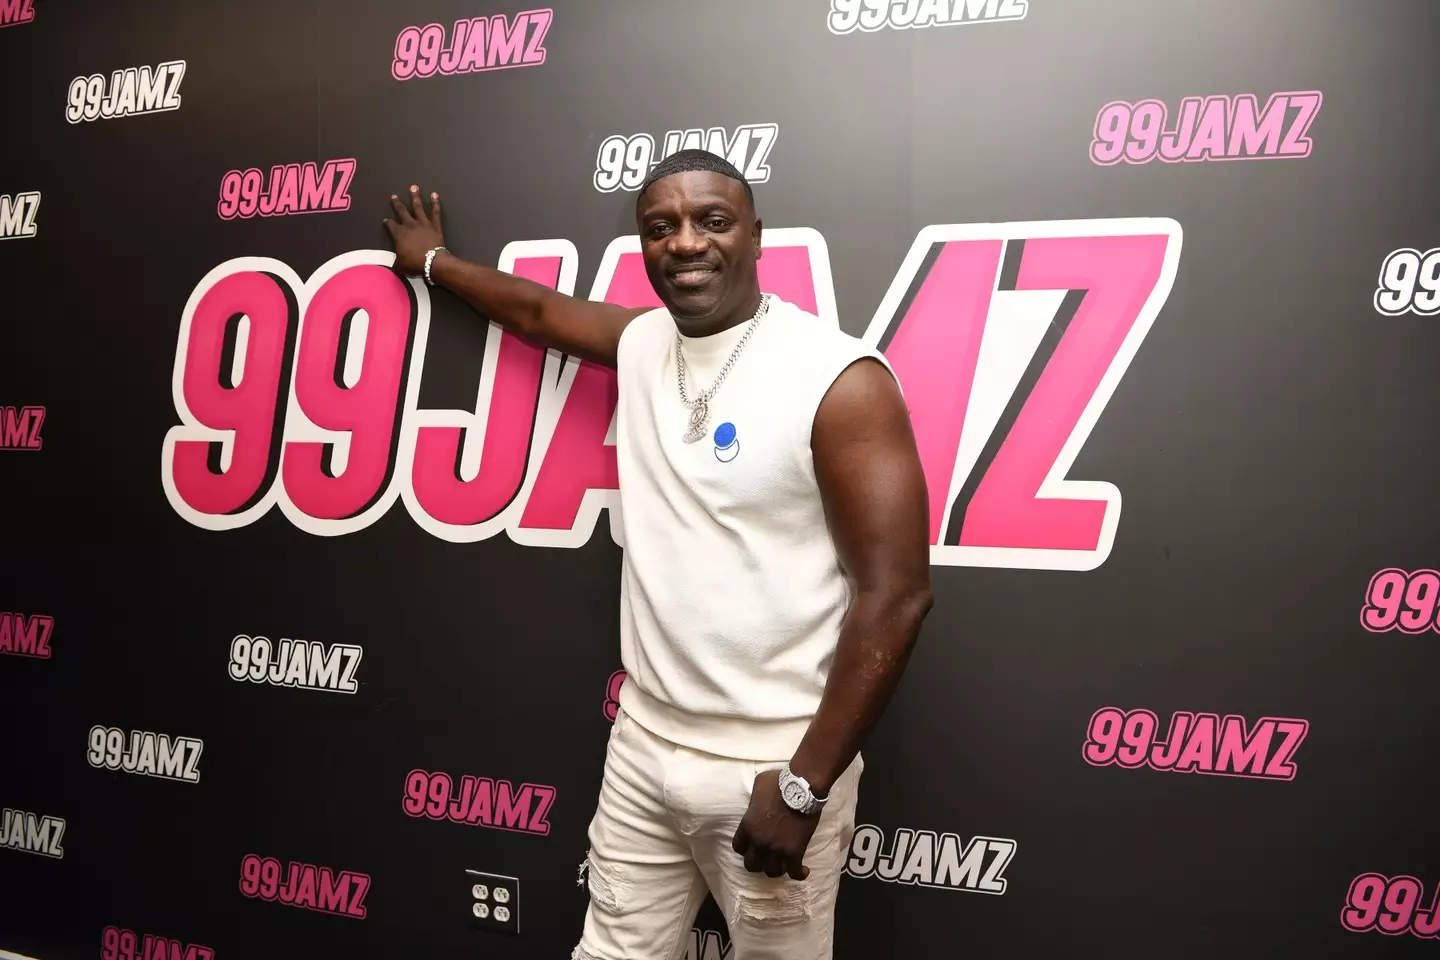 Rapper Akon defended Nick Cannon in a heated interview.